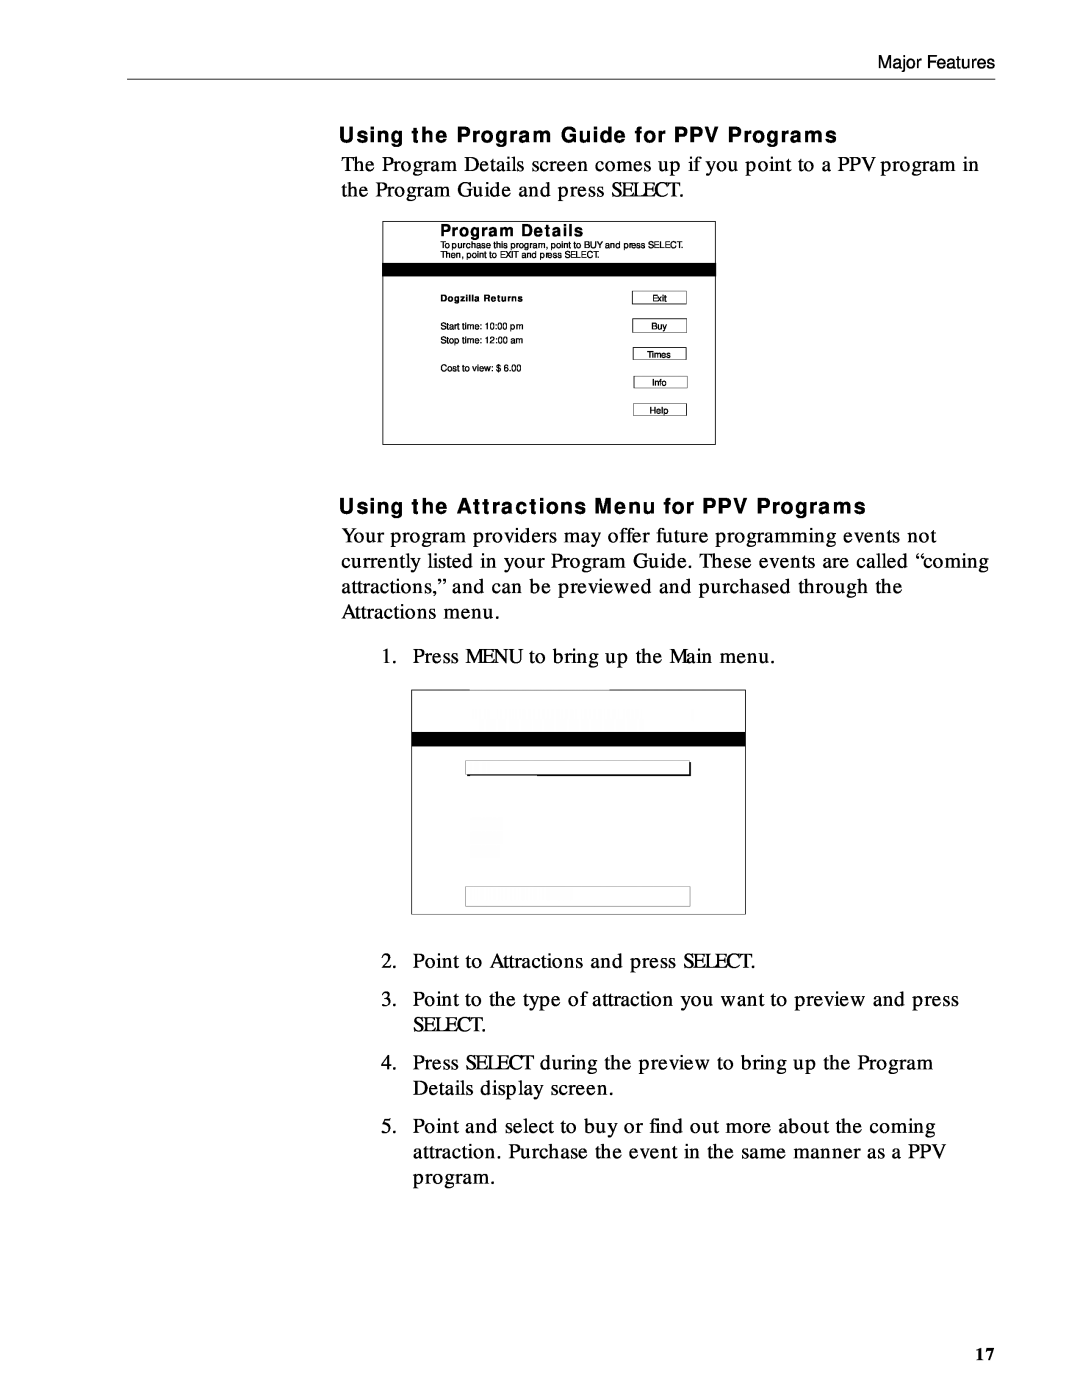 RCA DRD212NW user manual Using the Program Guide for PPV Programs, Using the Attractions Menu for PPV Programs 